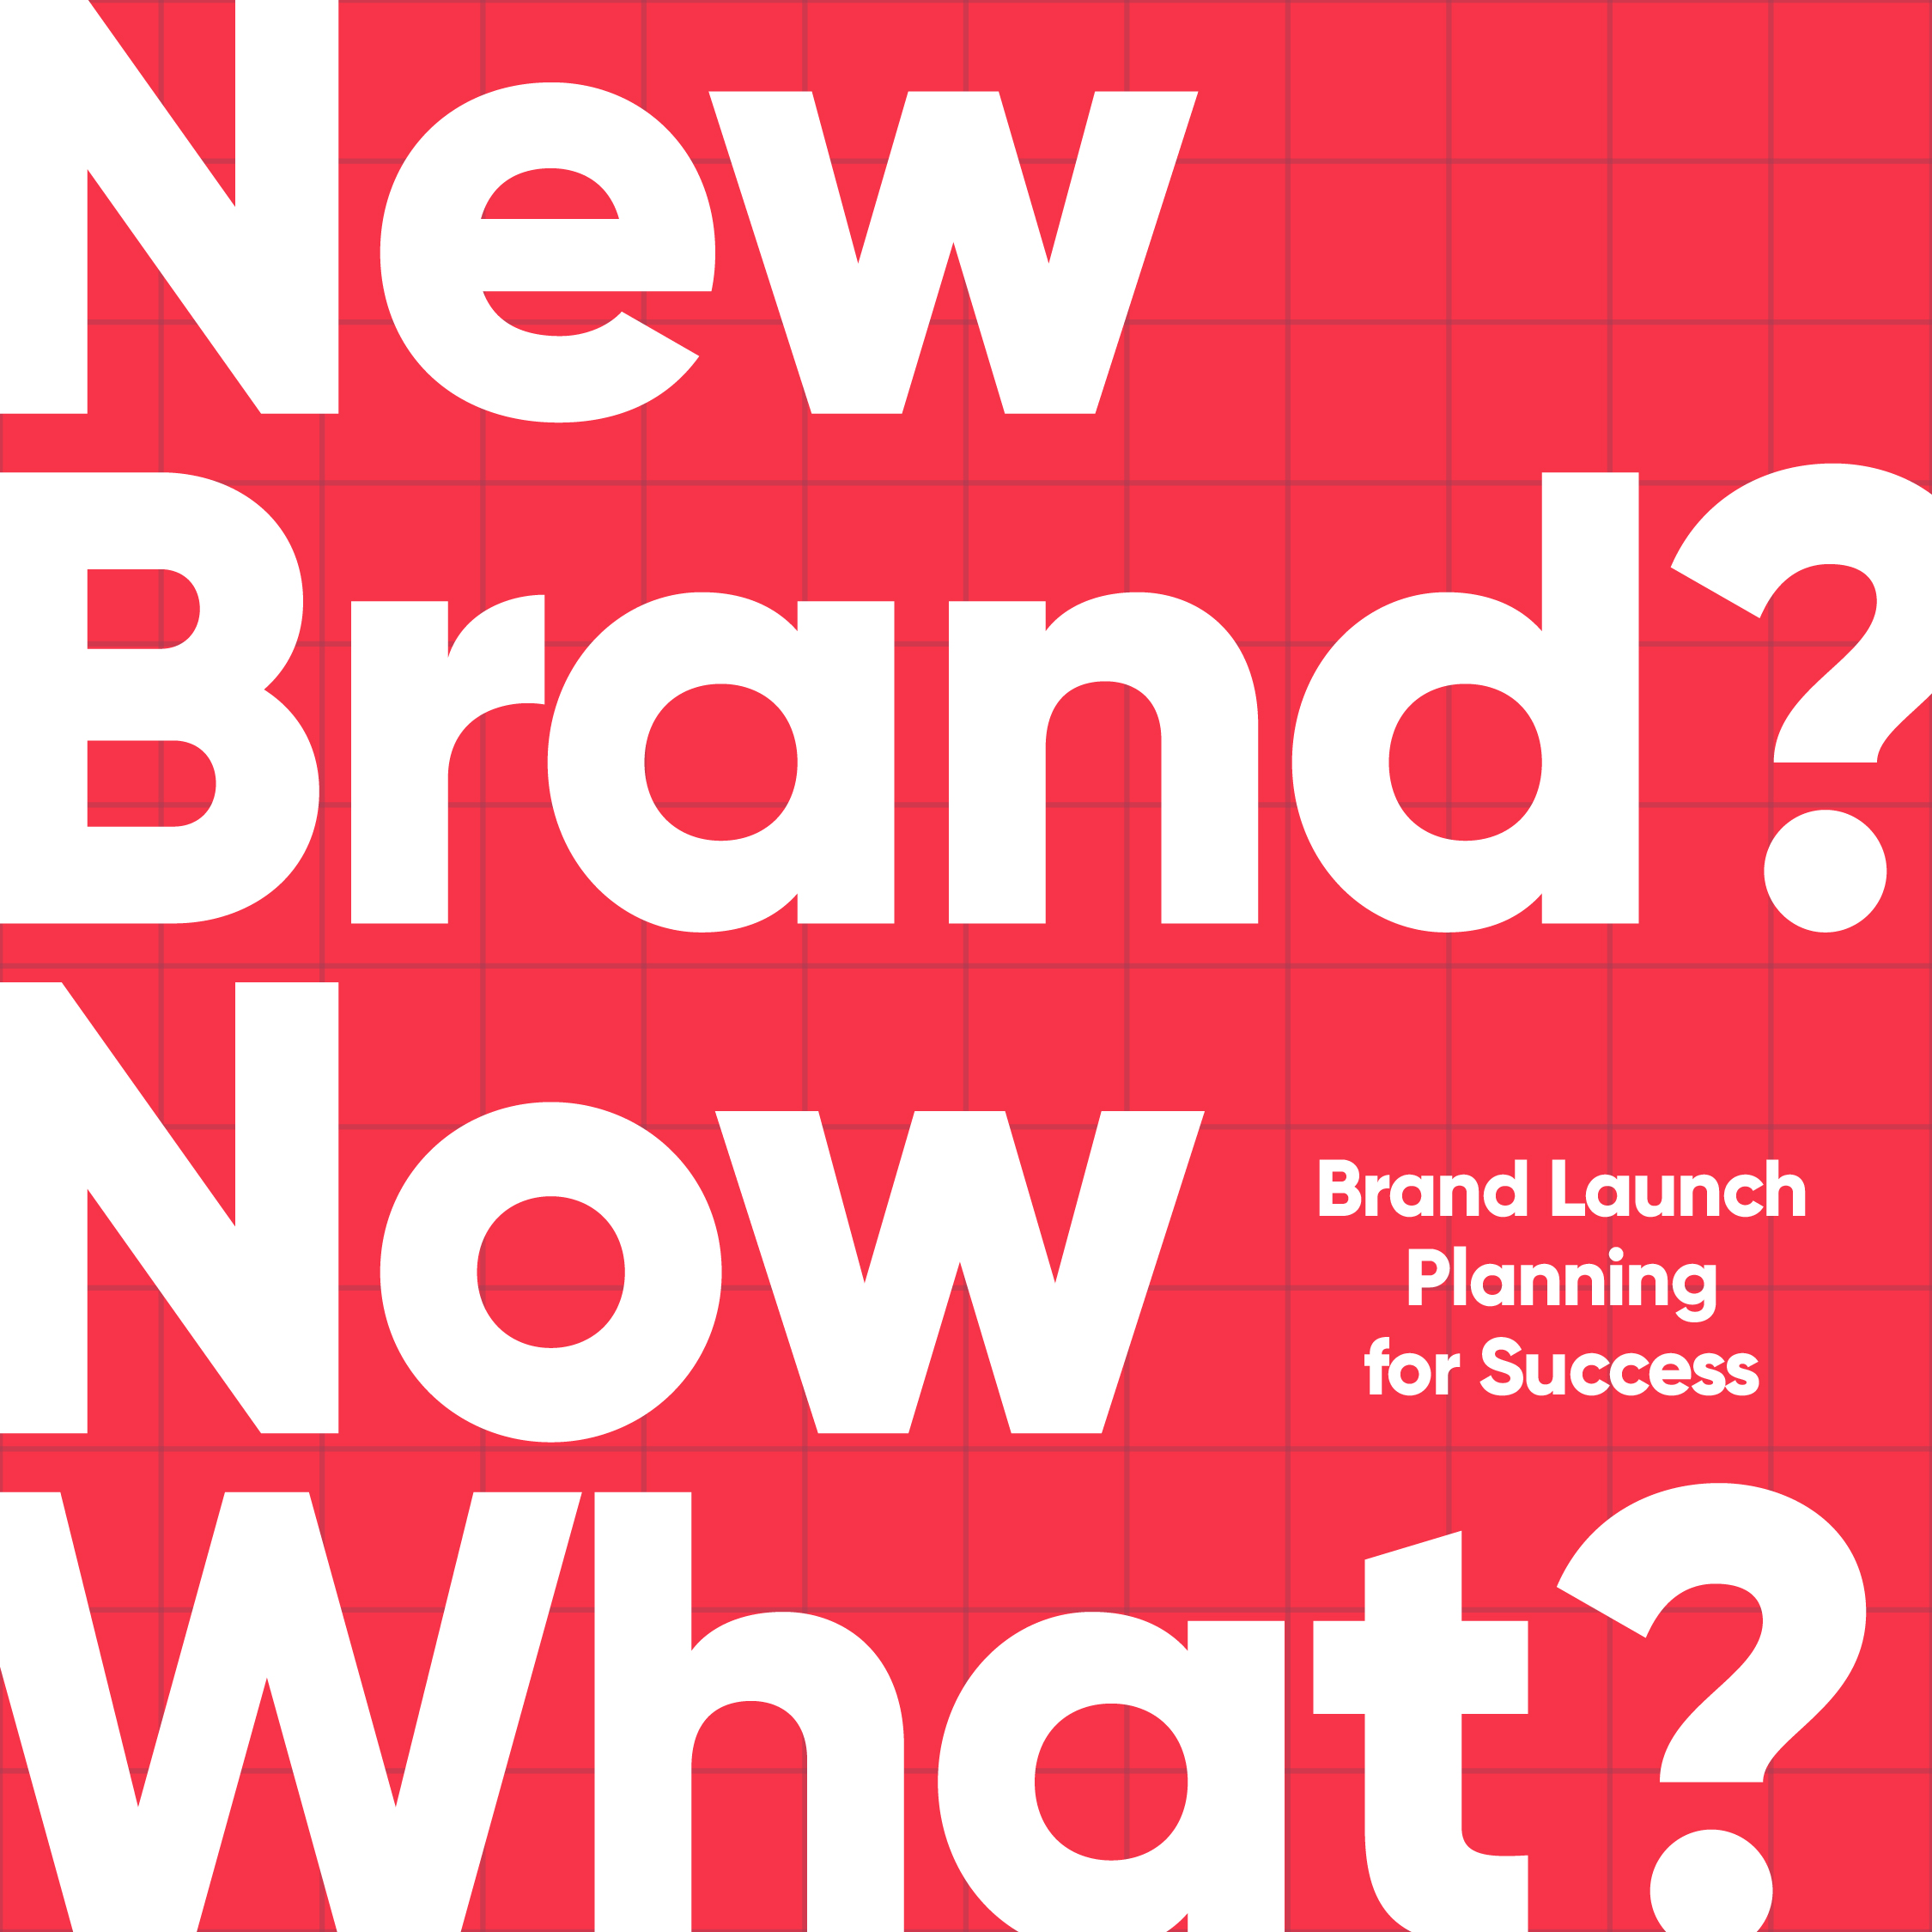 New brand? Now what? Brand launch planning for success. – Phire Group